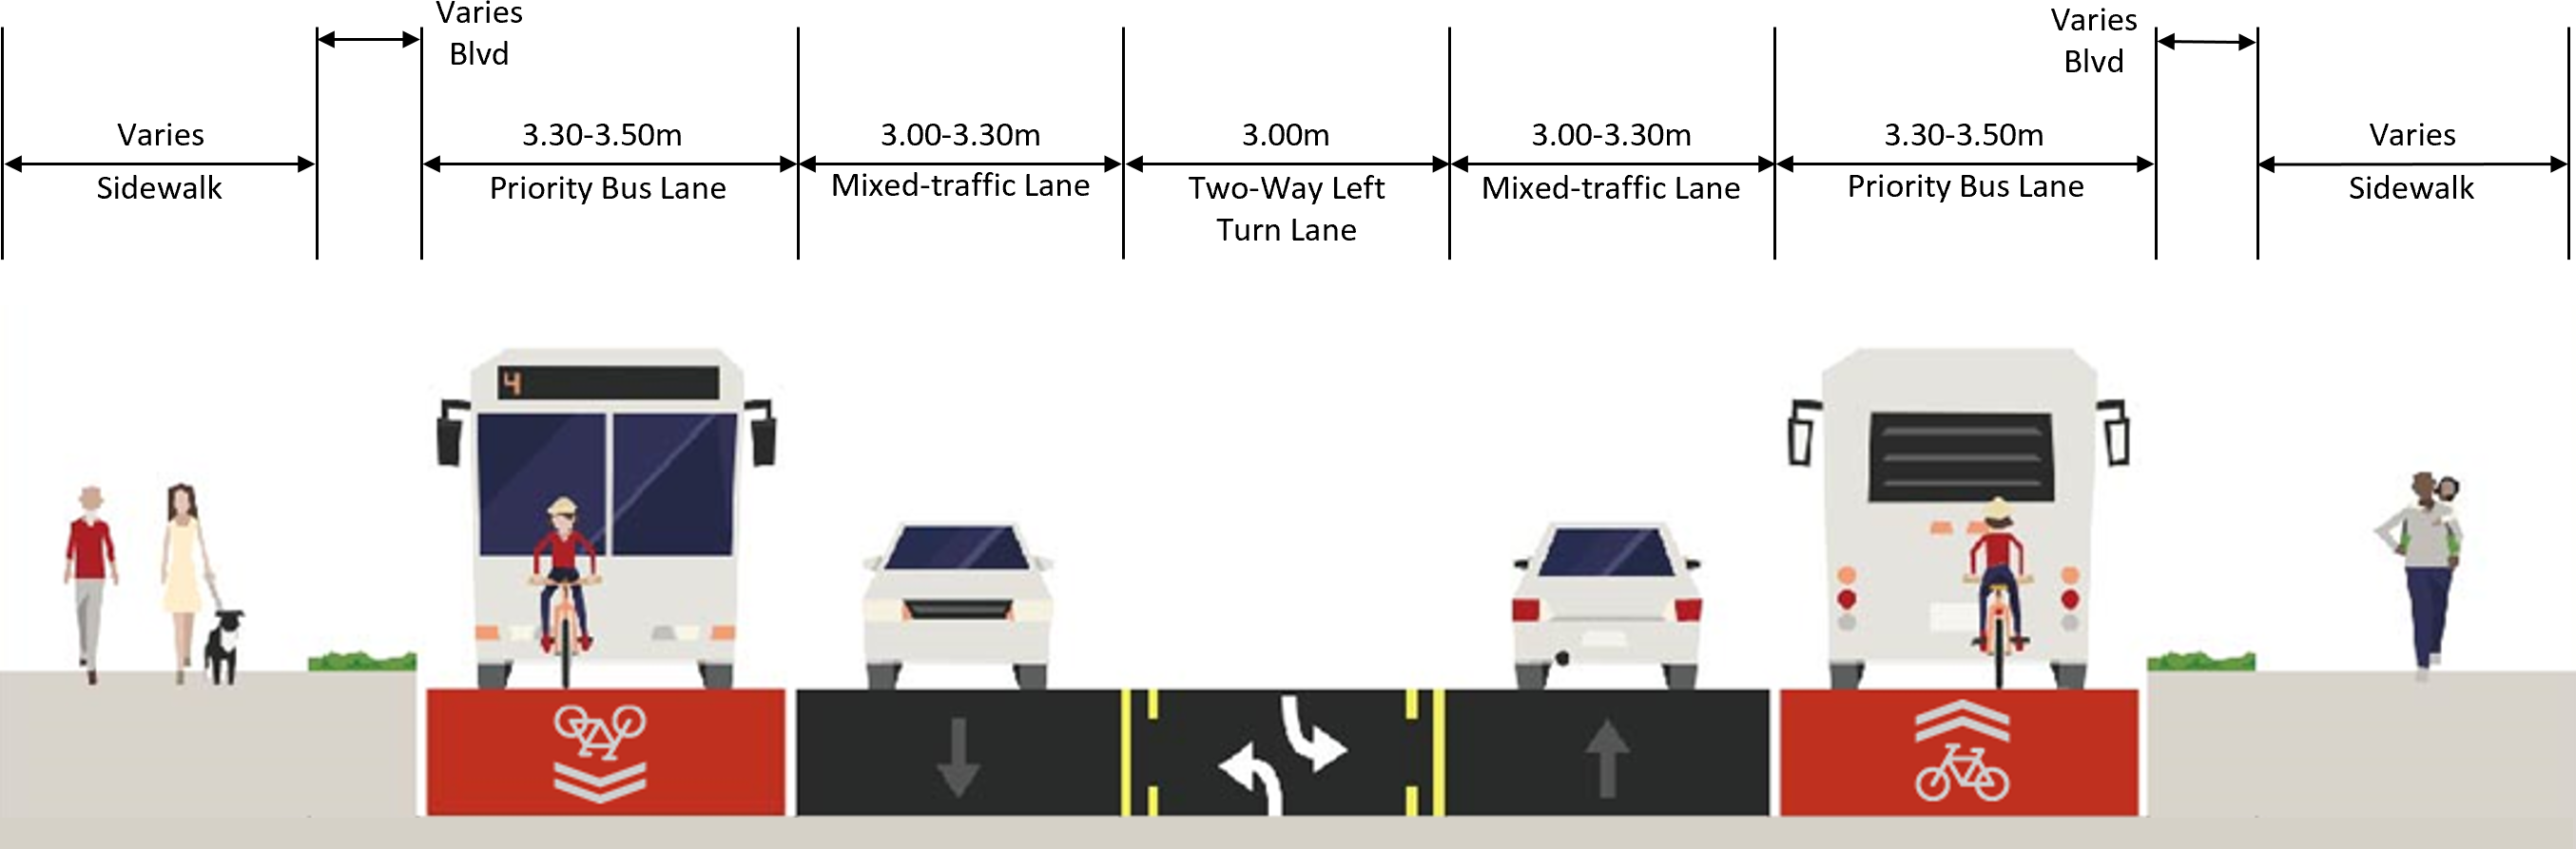 Typical cross-section for Option 3. From left to right: sidewalk, boulevard, priority bus lane painted red, mixed-traffic lane, two-way left turn lane, mixed-traffic lane, priority bus lane painted red, boulevard and sidewalk.